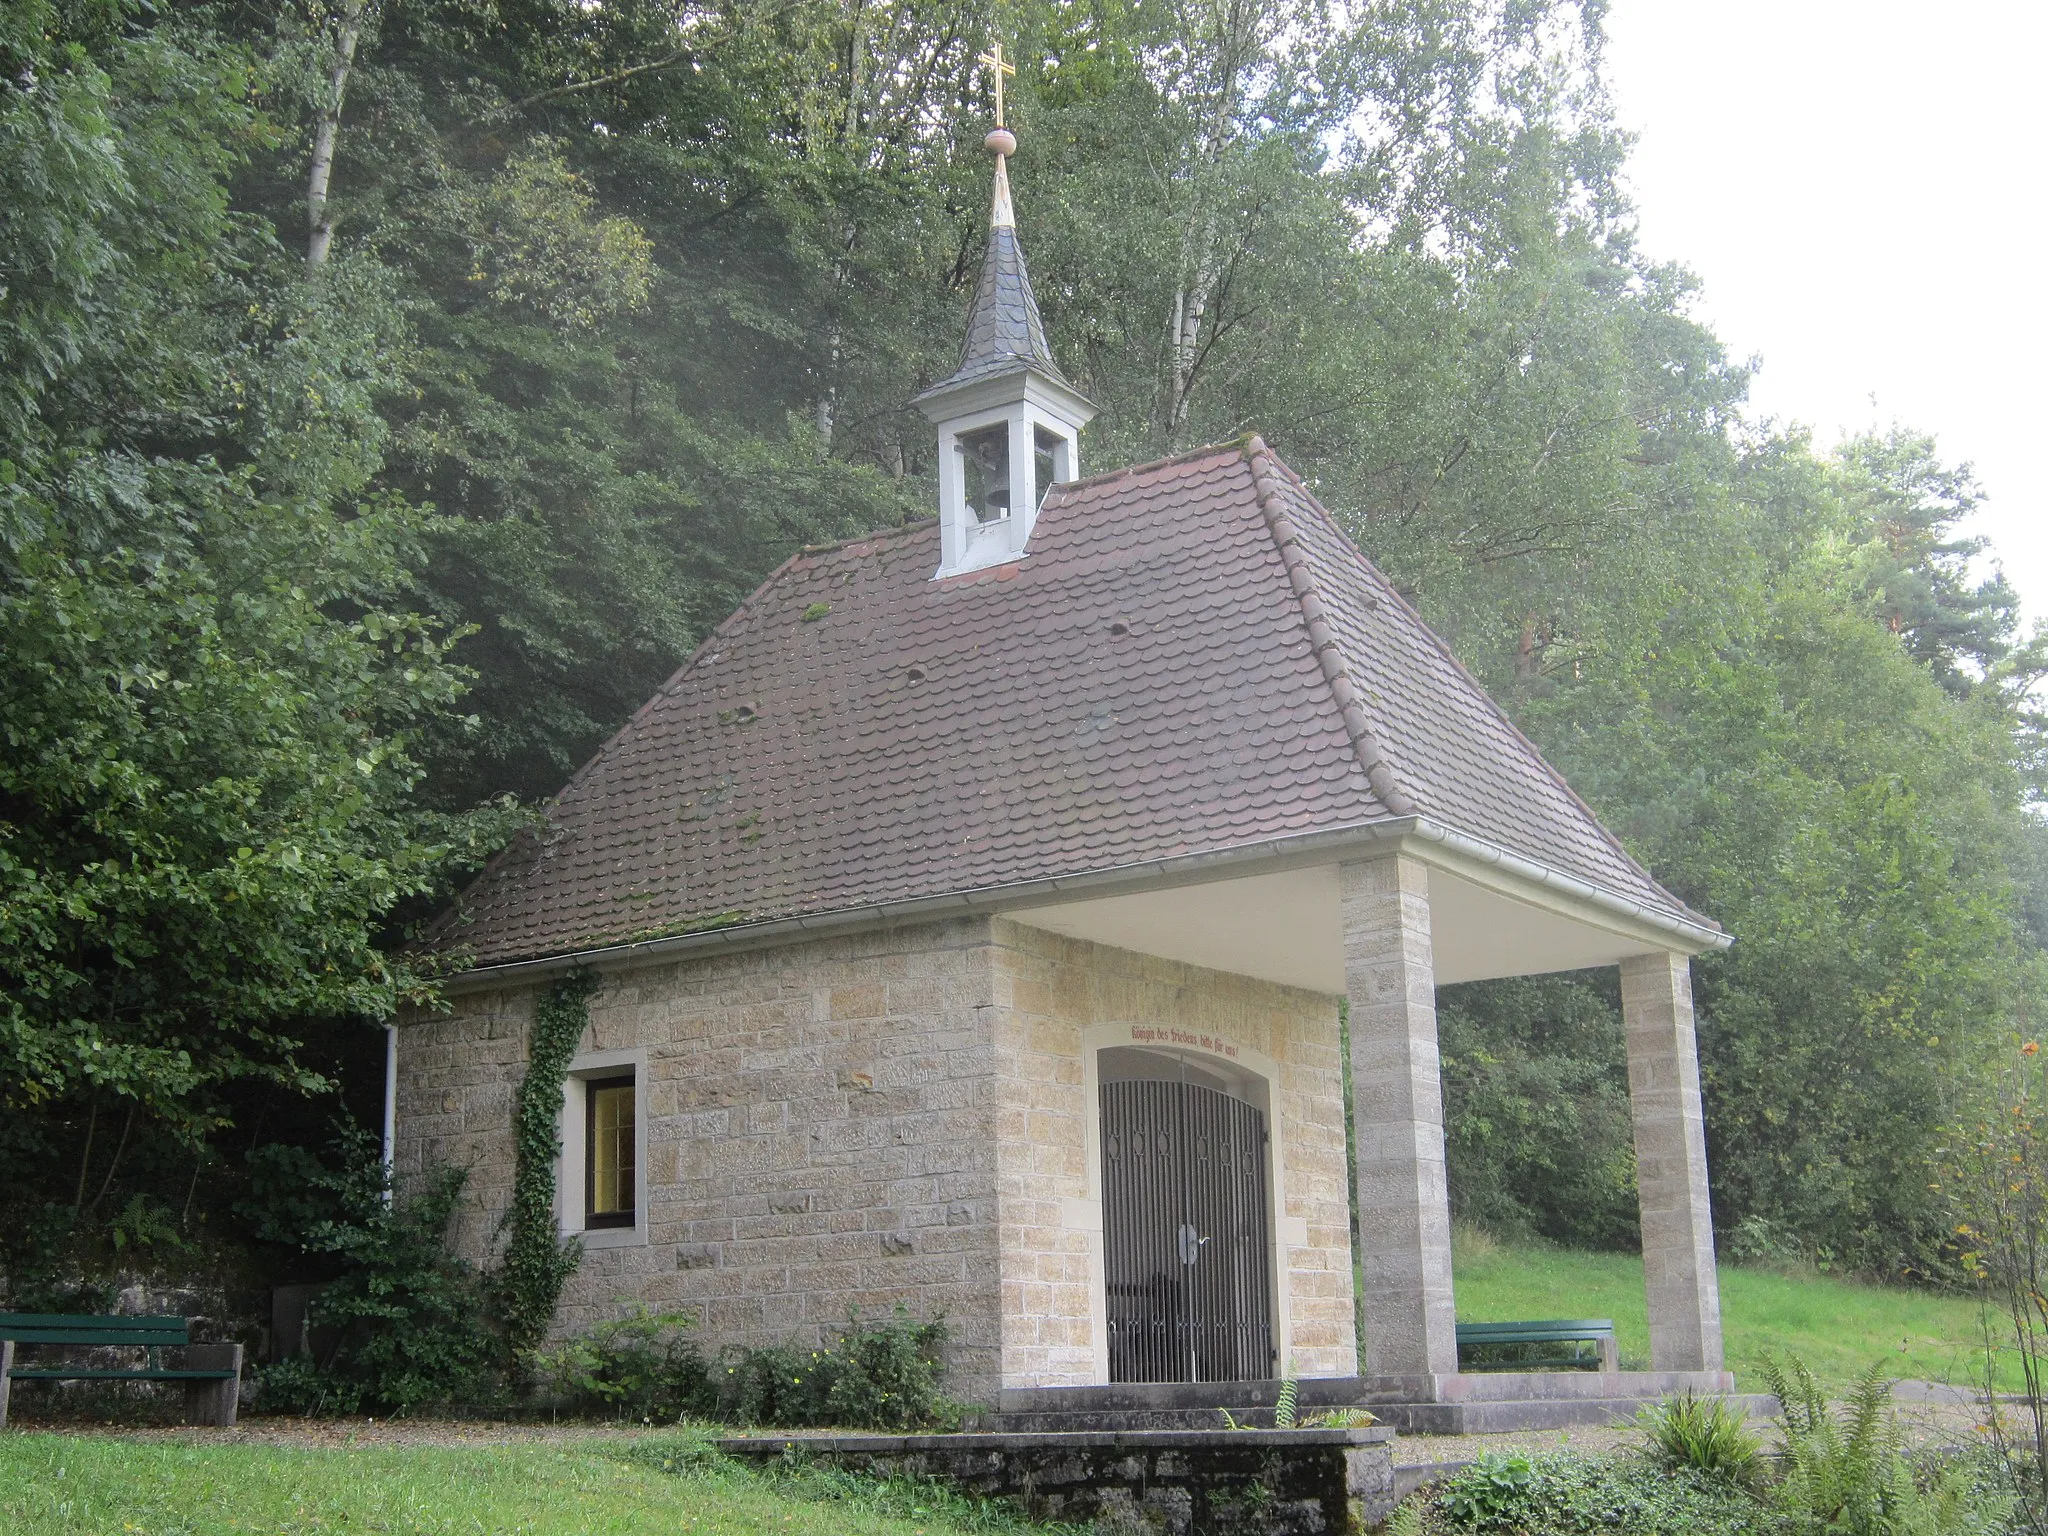 Photo showing: The "Friedenskapelle", a chapel in the German town of Nüdlingen in Lower Franconia (Bavaria).